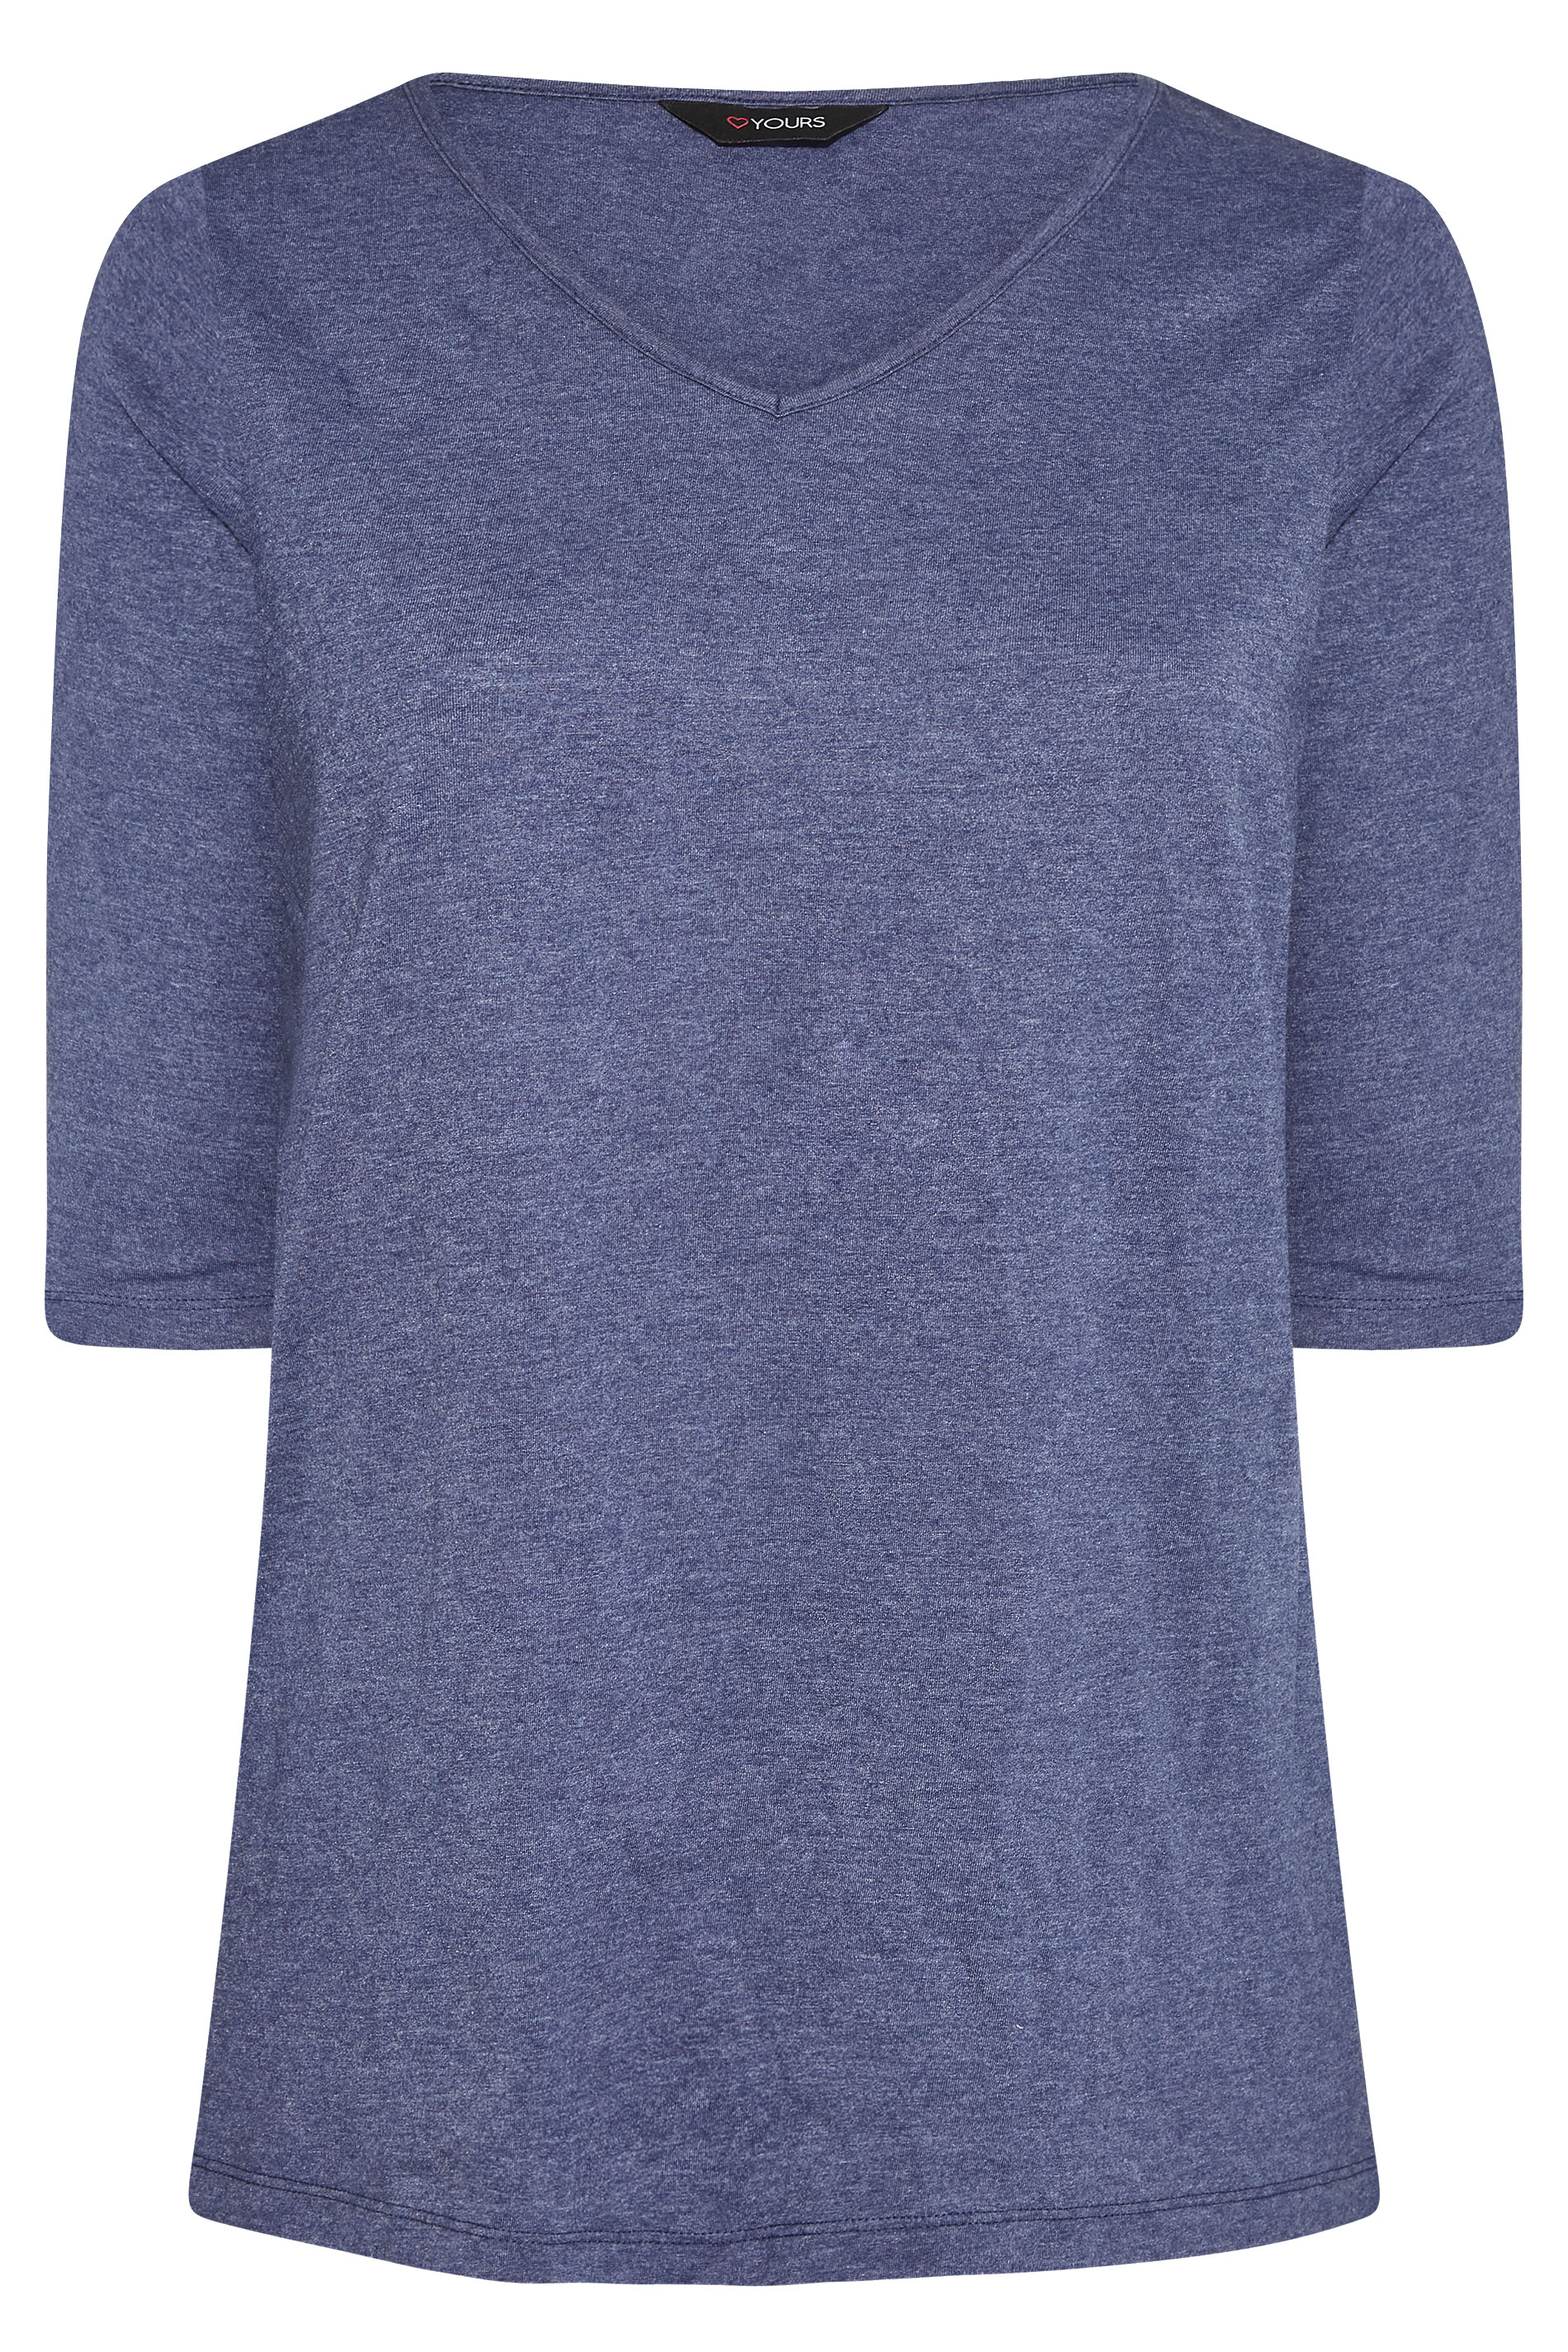 Grande taille  Tops Grande taille  T-Shirts | T-Shirt Bleu Col V Manches Longues - LG71026